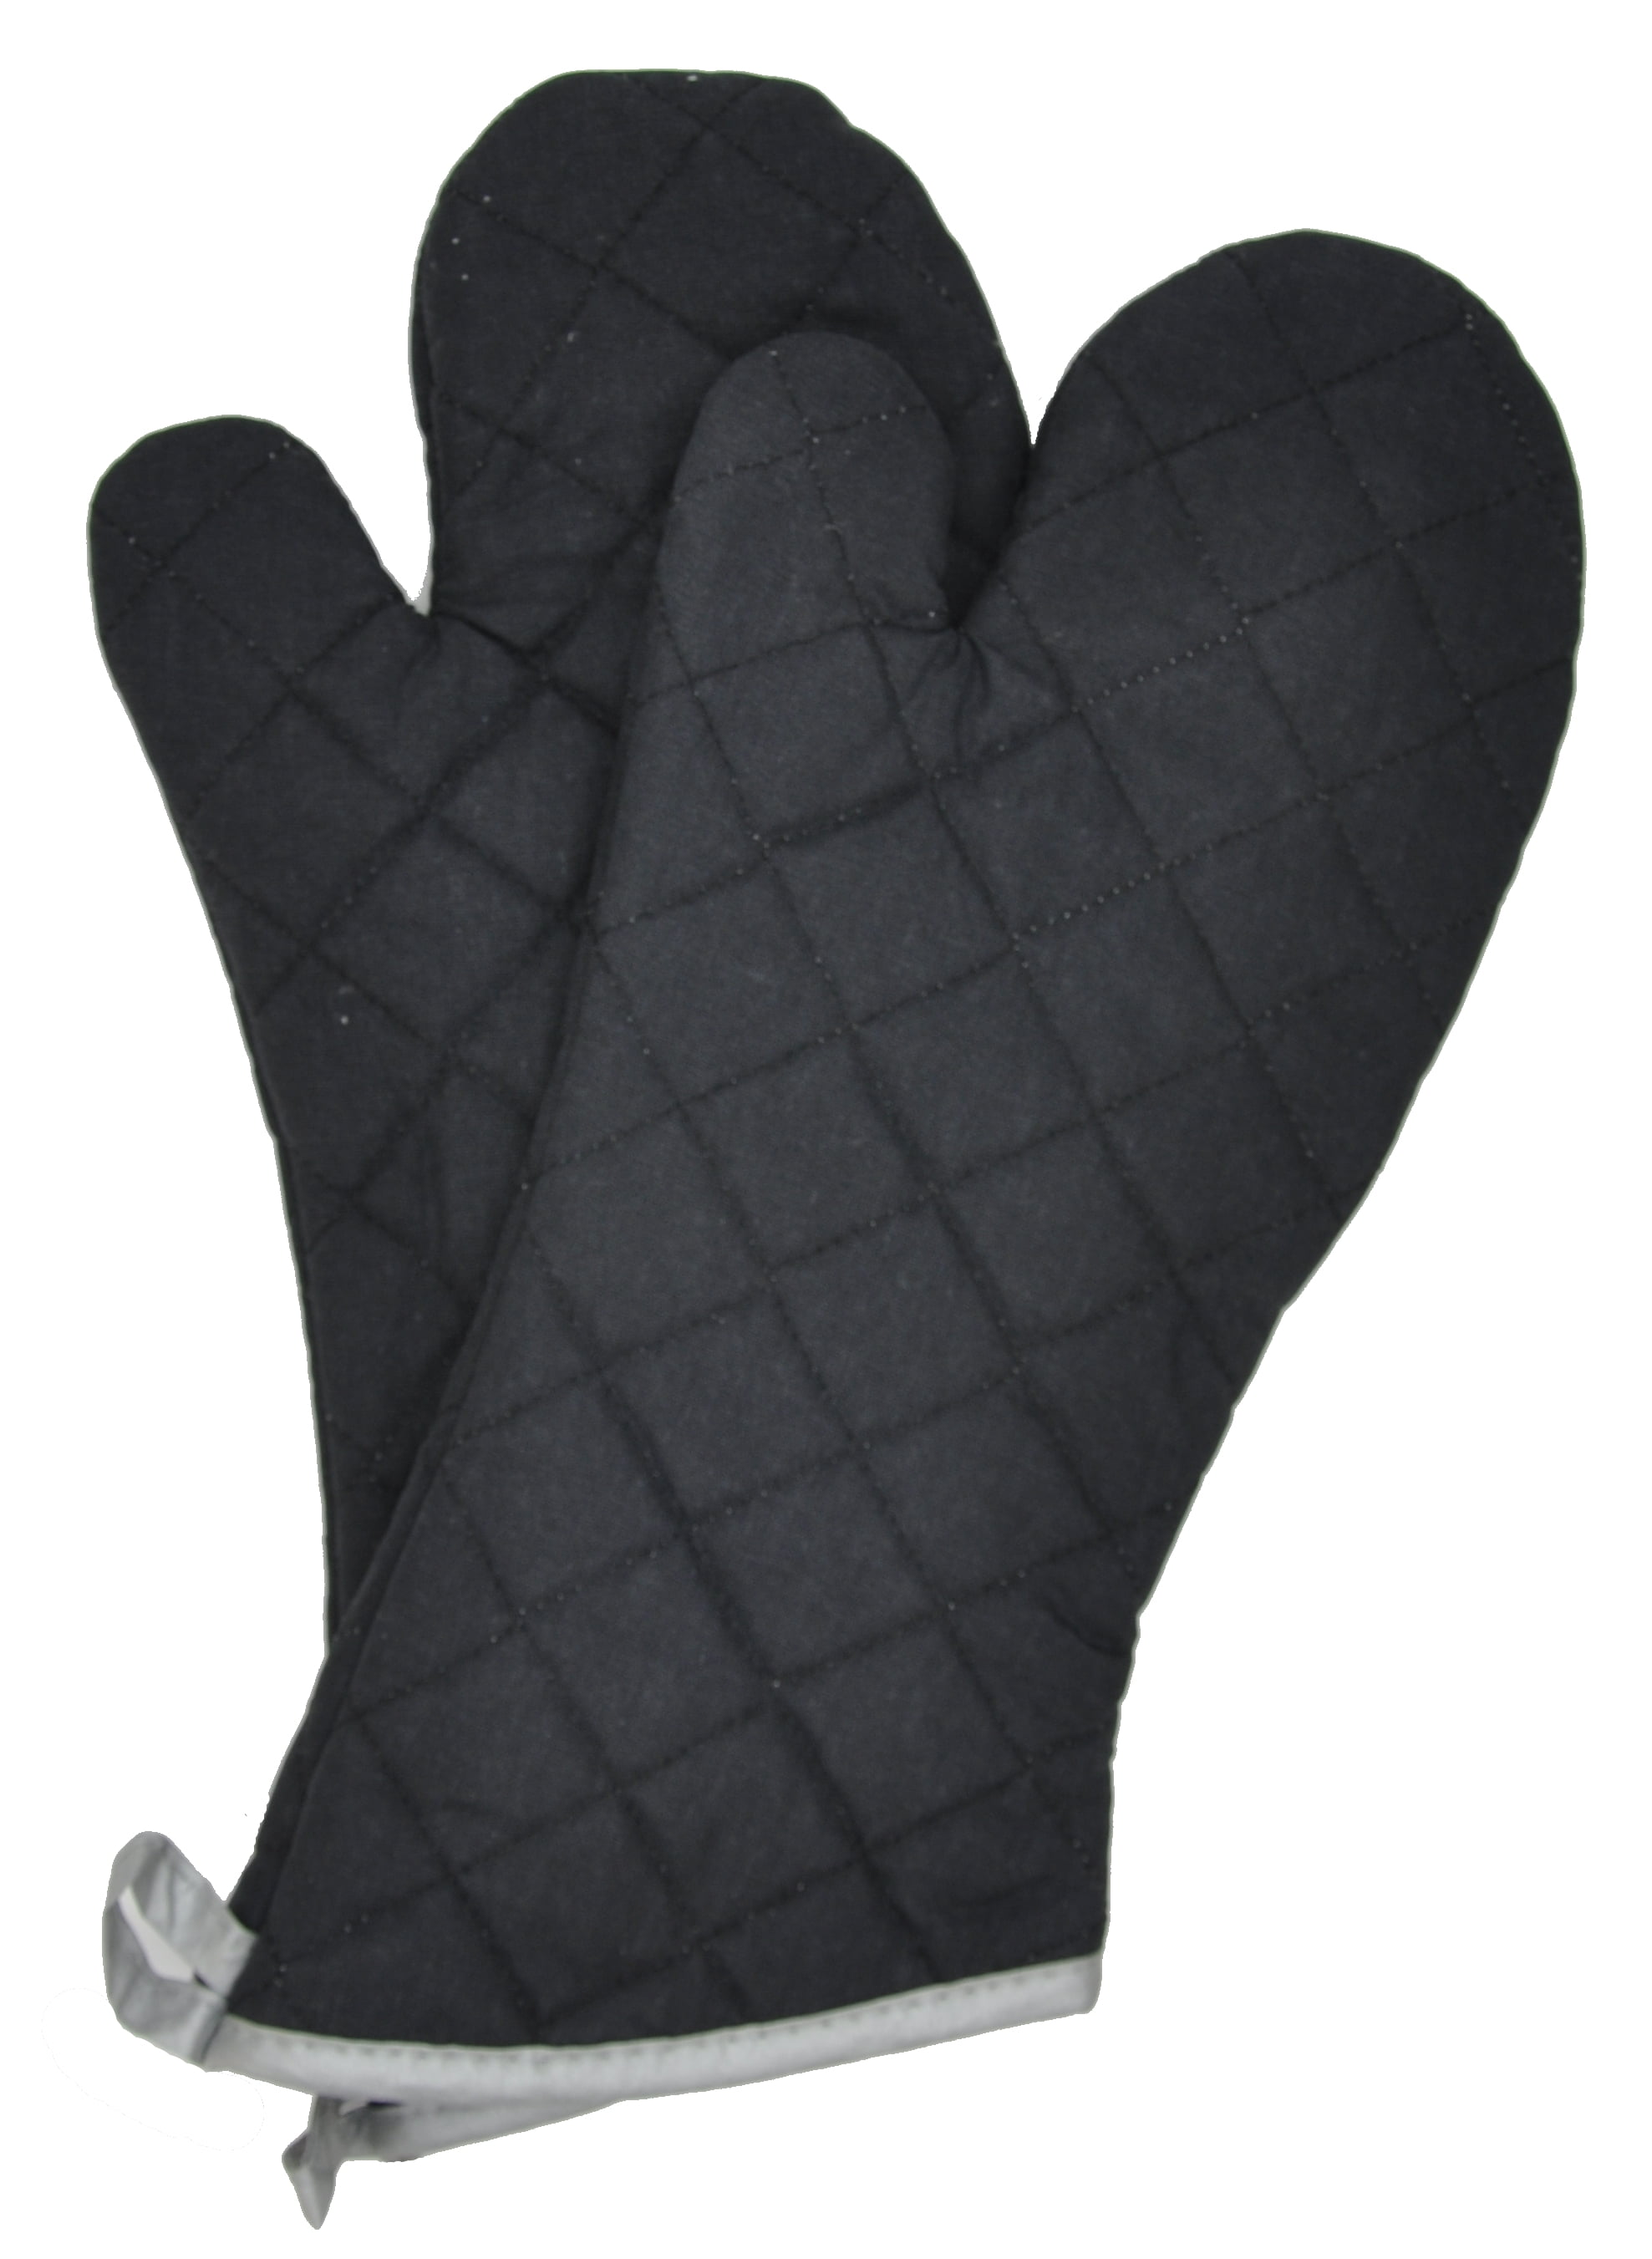 Oven Mitts, Set of 2 Oversized Quilted Mittens, Flame and Heat